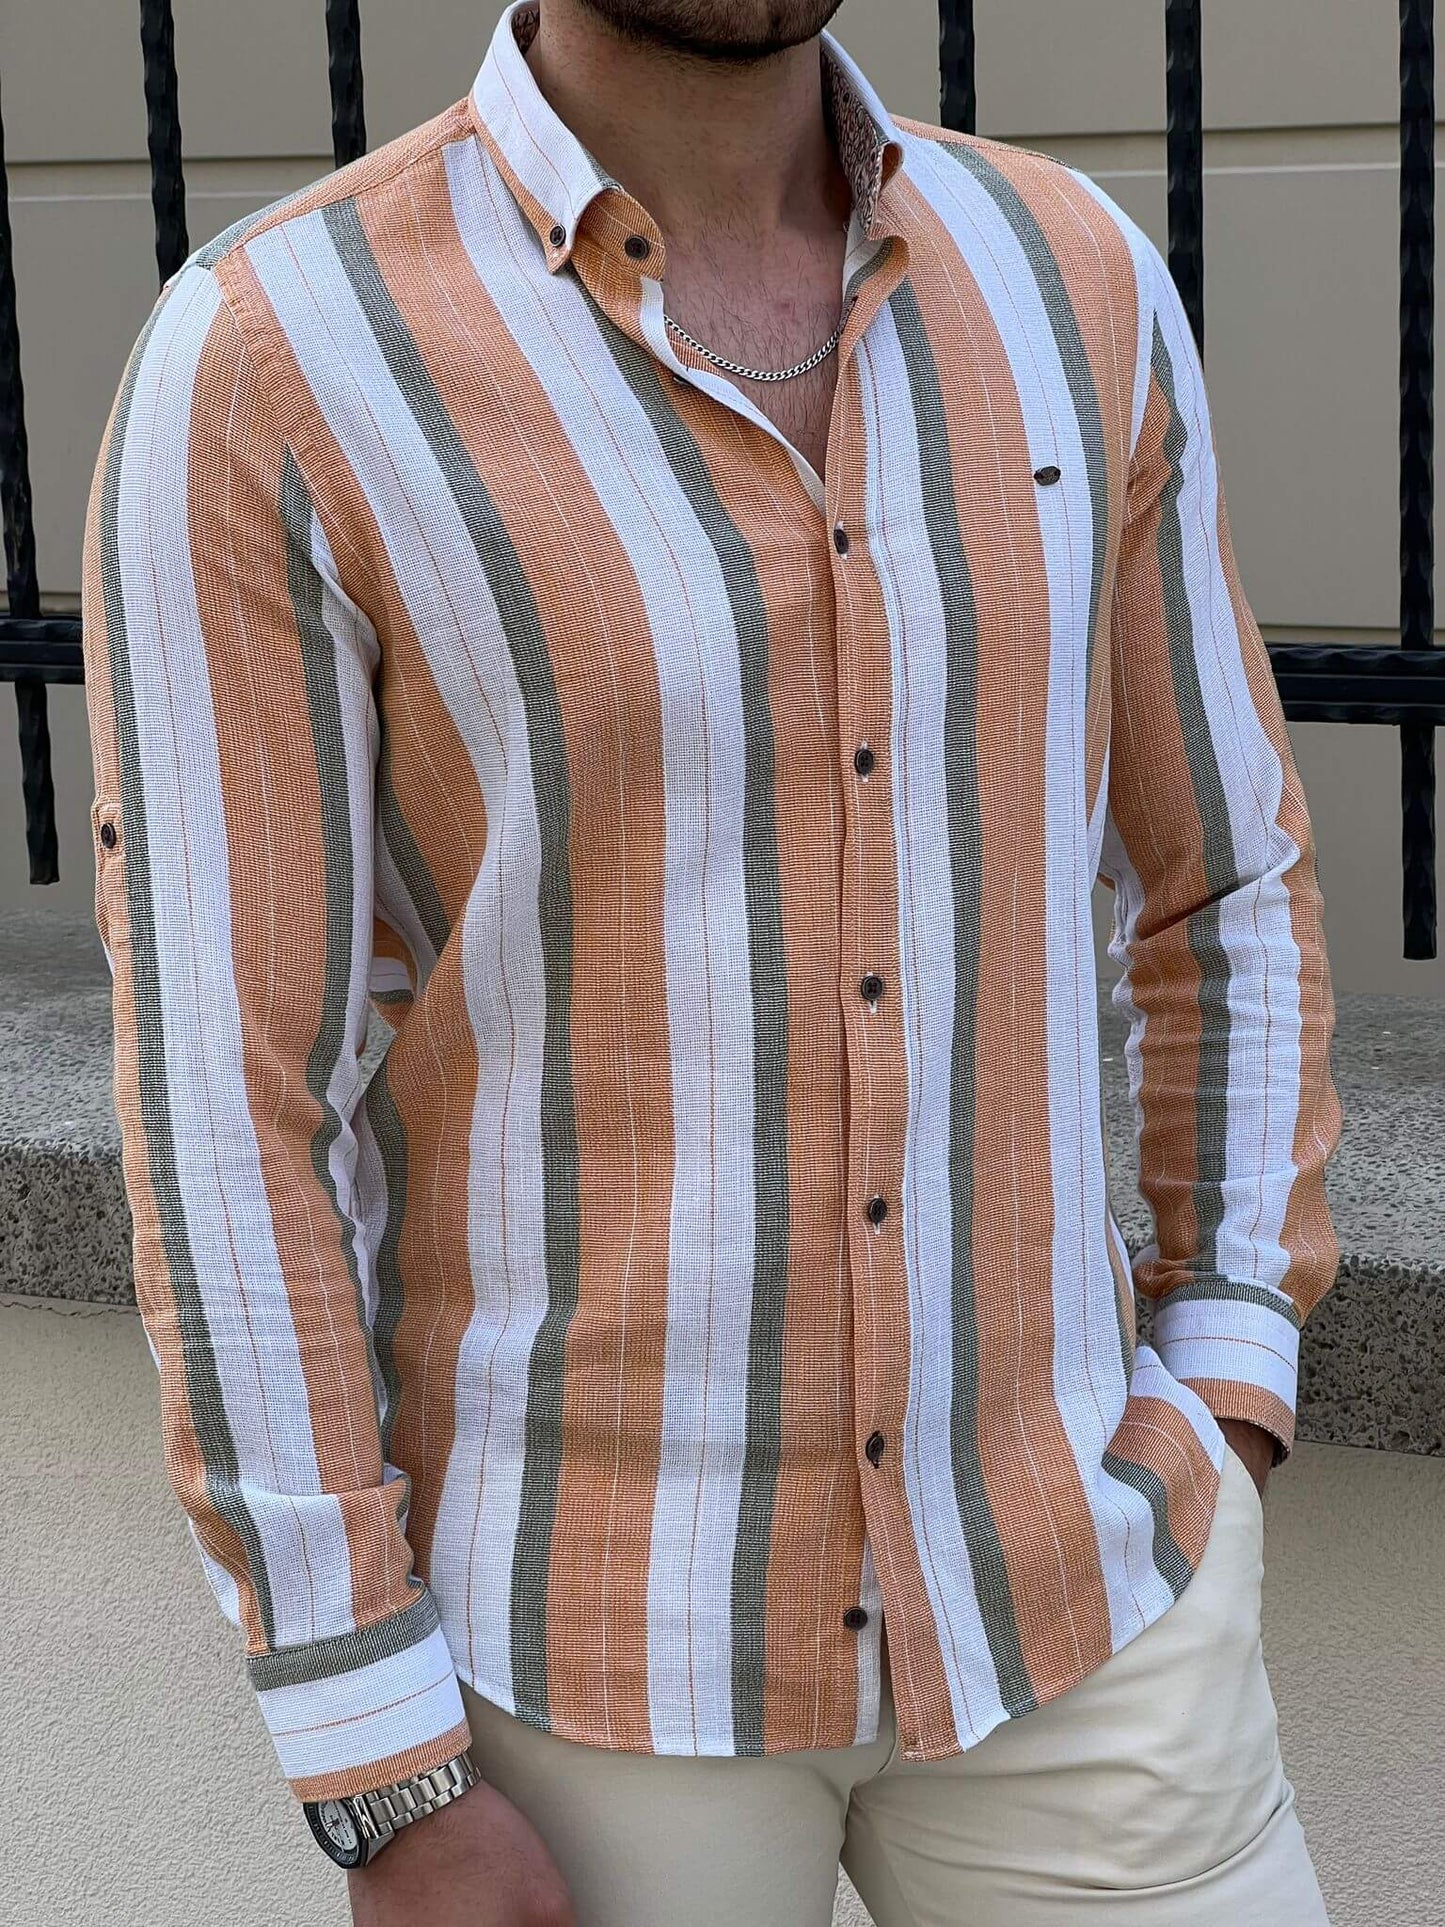 Folded sleeve shirt in mustard color with trendy stripes